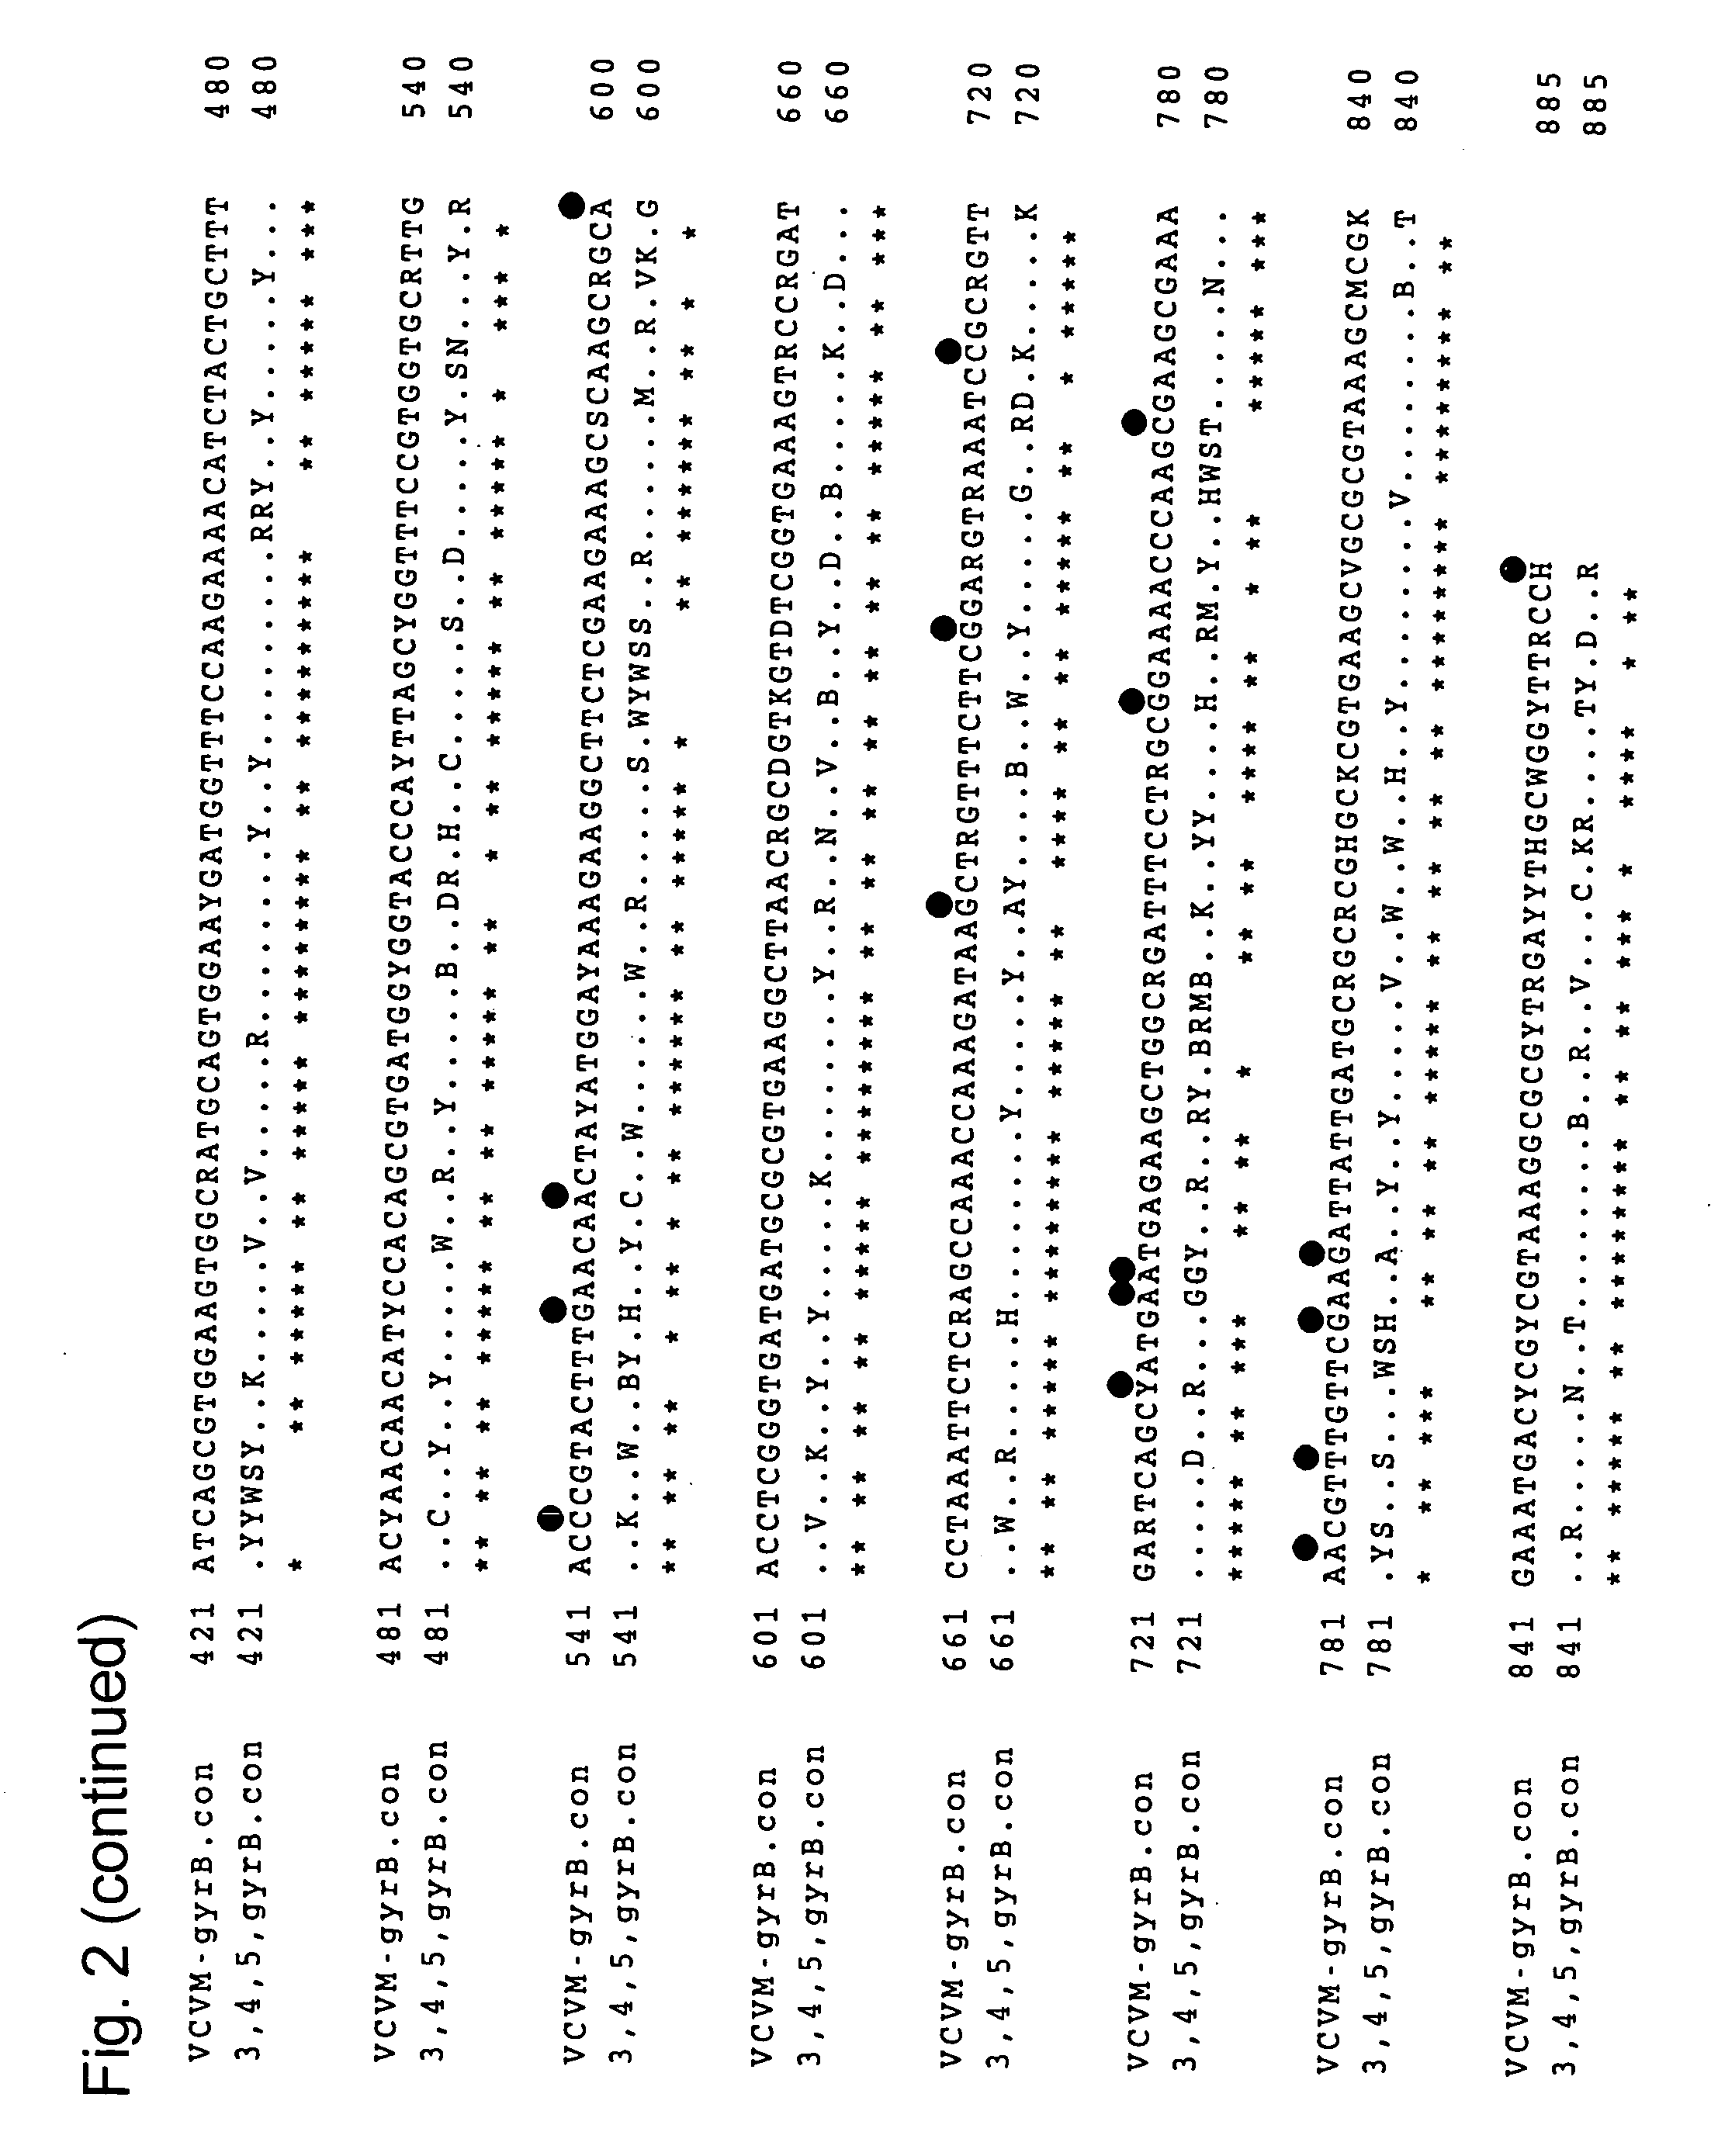 Primer and probe for detecting vibrio cholerae or vibrio mimicus and detection method using the same